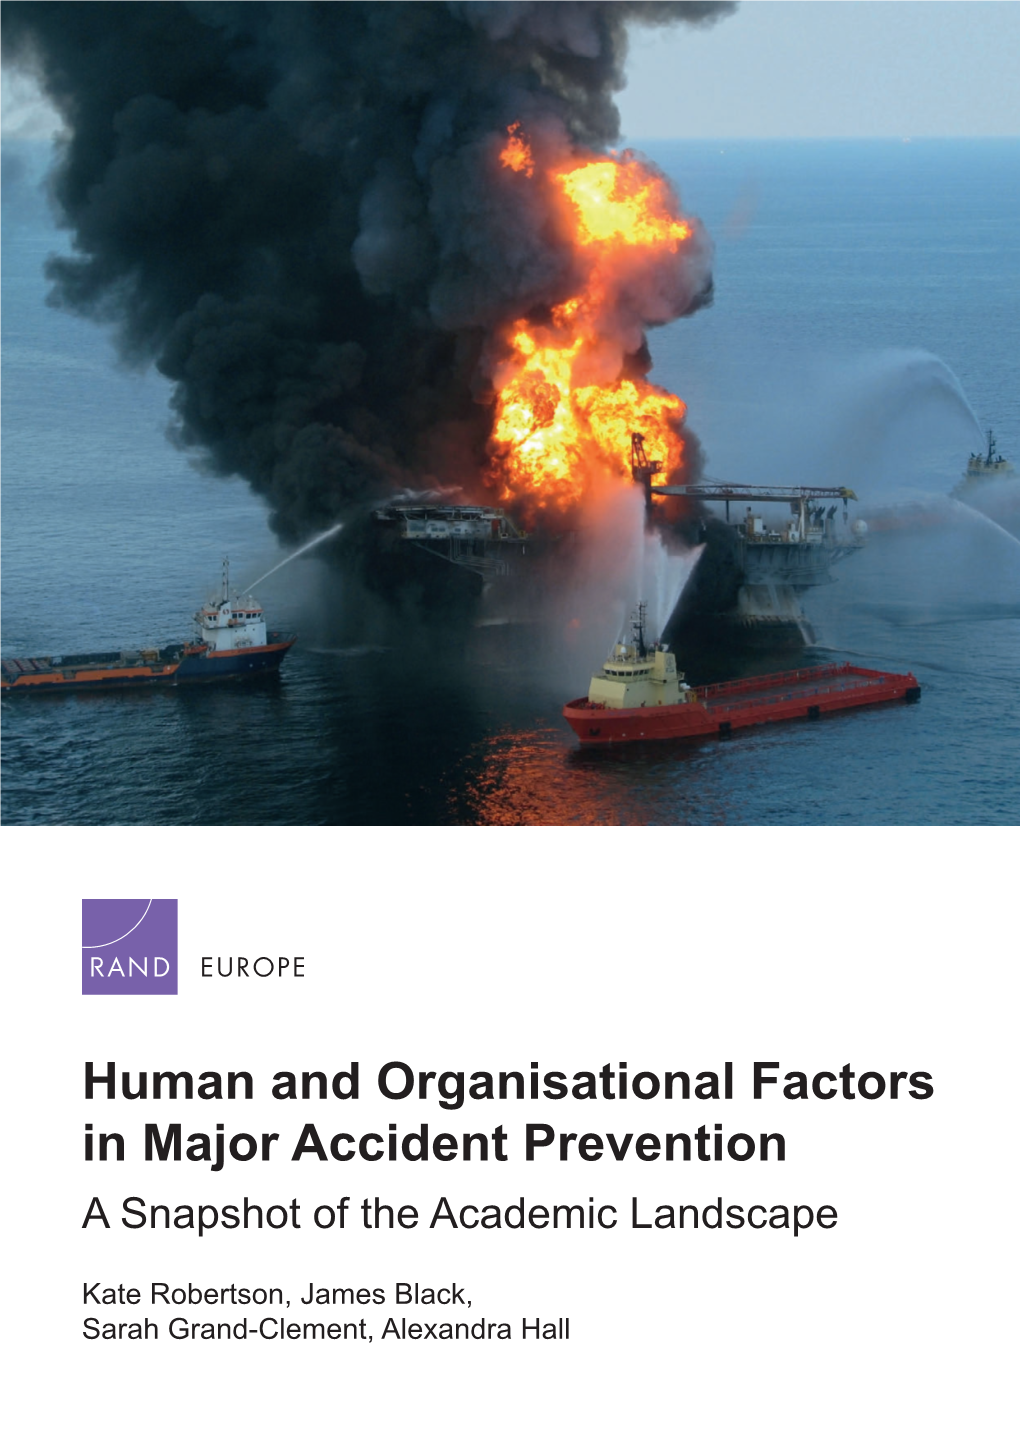 Human and Organisational Factors in Major Accident Prevention a Snapshot of the Academic Landscape